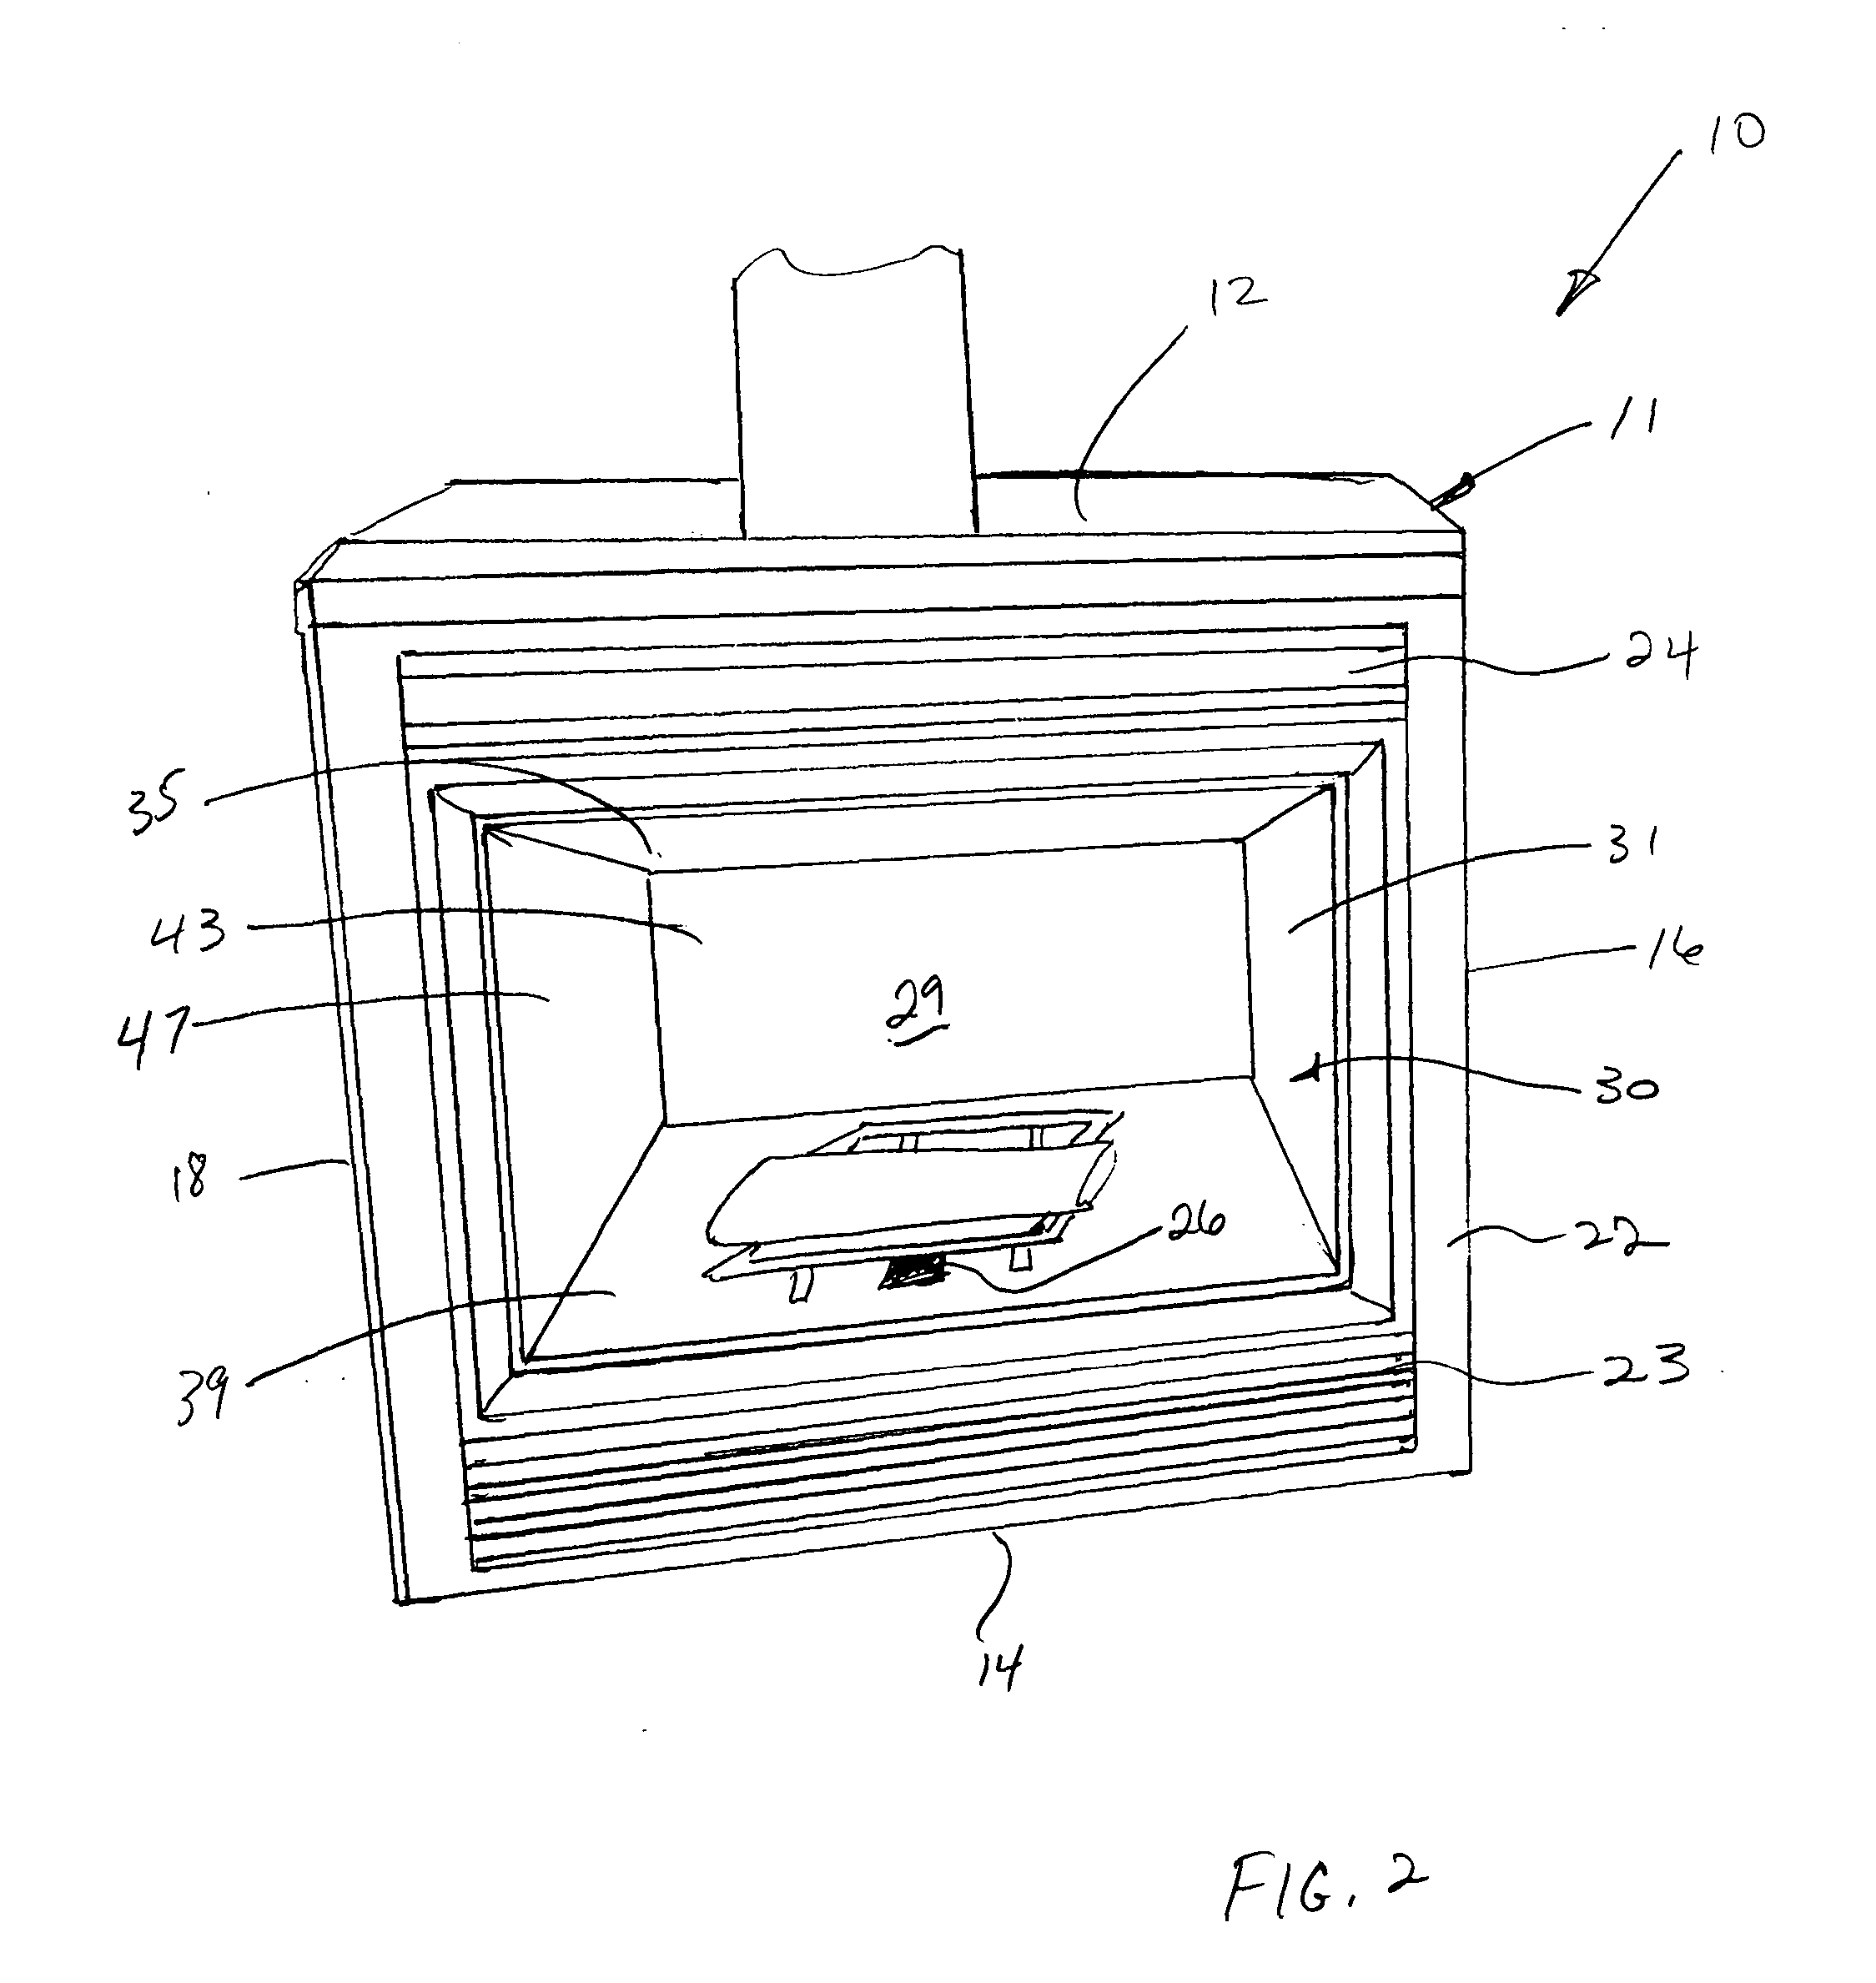 Generation of electricity in a fireplace using thermoelectric module